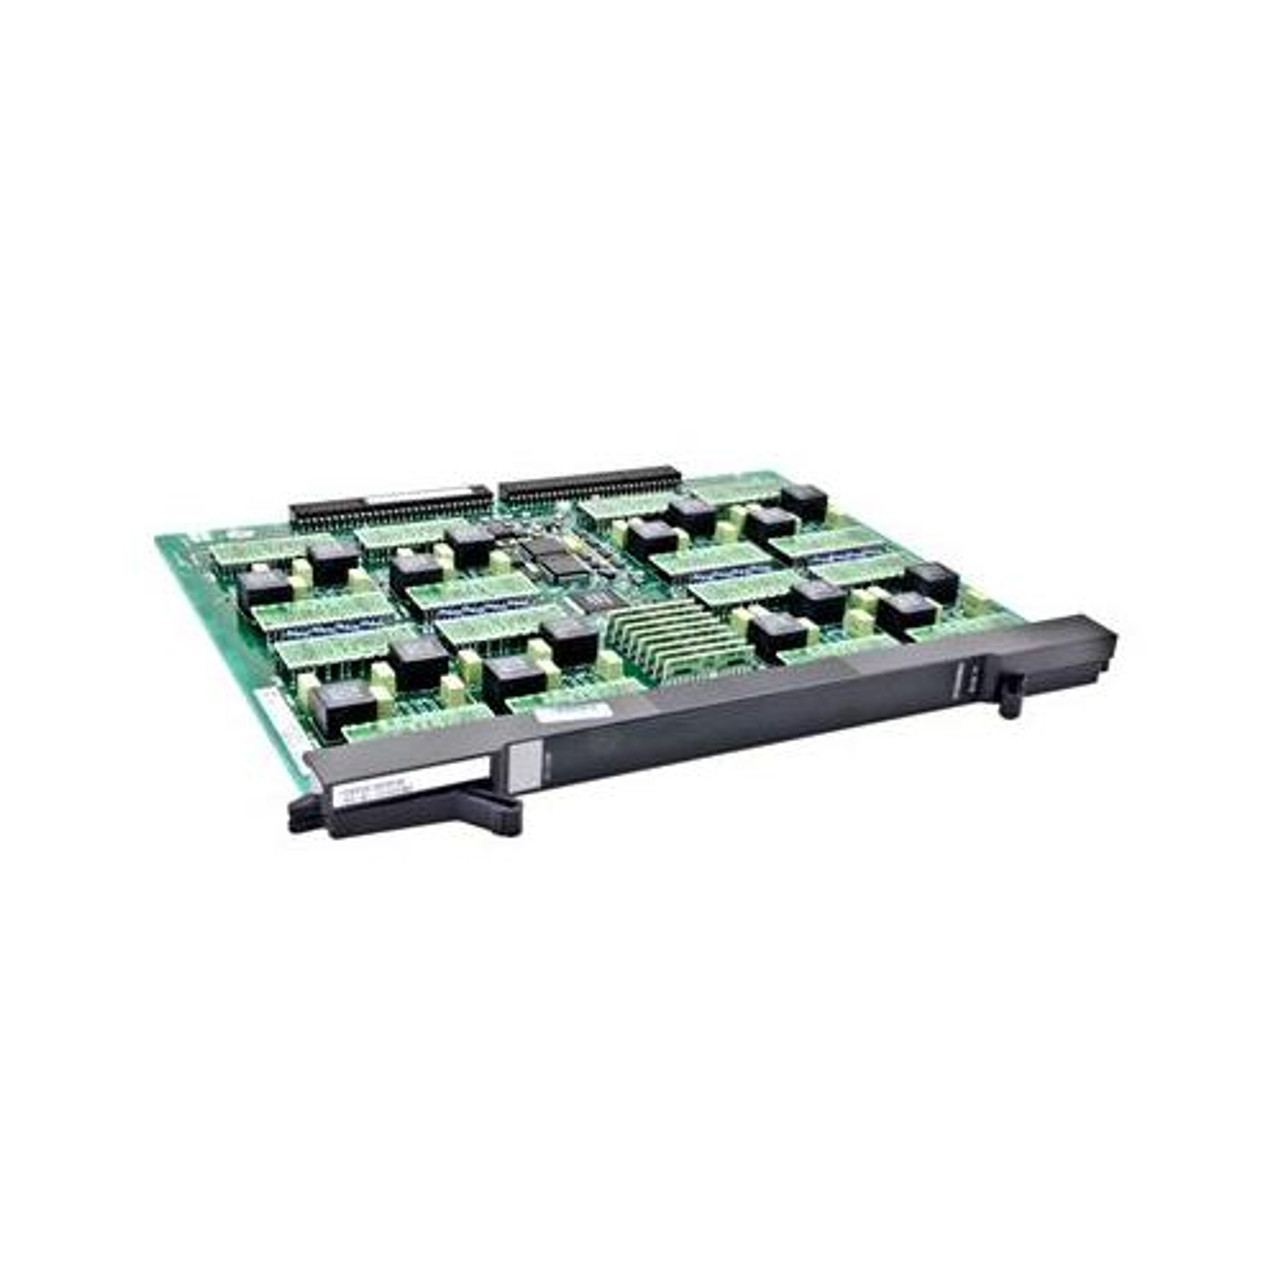 DSX-4R-WB160 ADC Kentrox Ds3 6 Port Module with Upper Sleeve